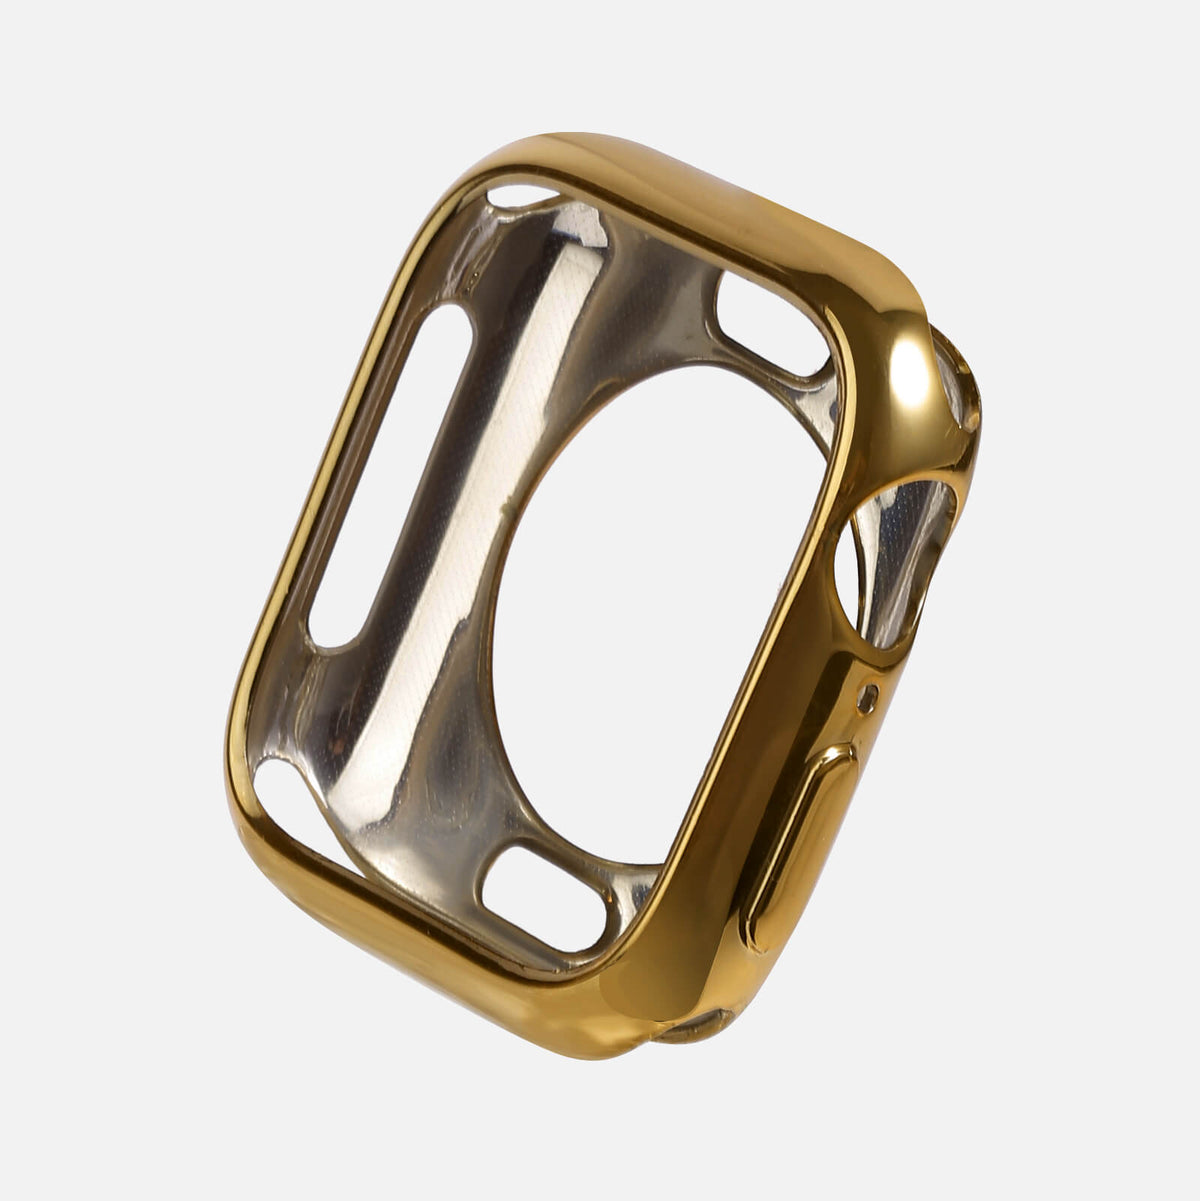 Apple Watch TPU Chrome Bumper Protection Case - Gold